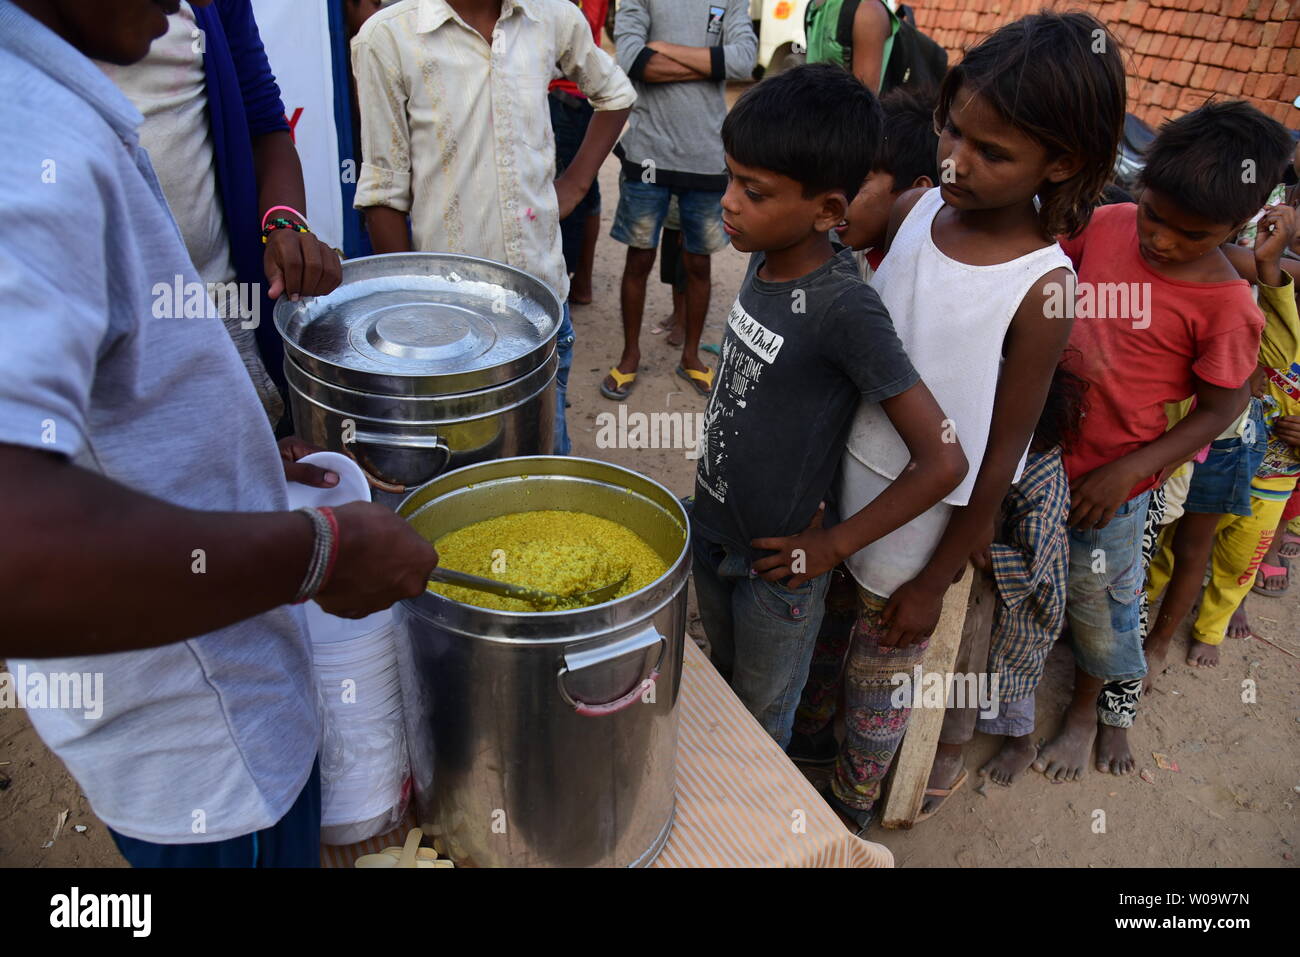 Poor children at a food distribution camp in New Delhi, India. Stock Photo